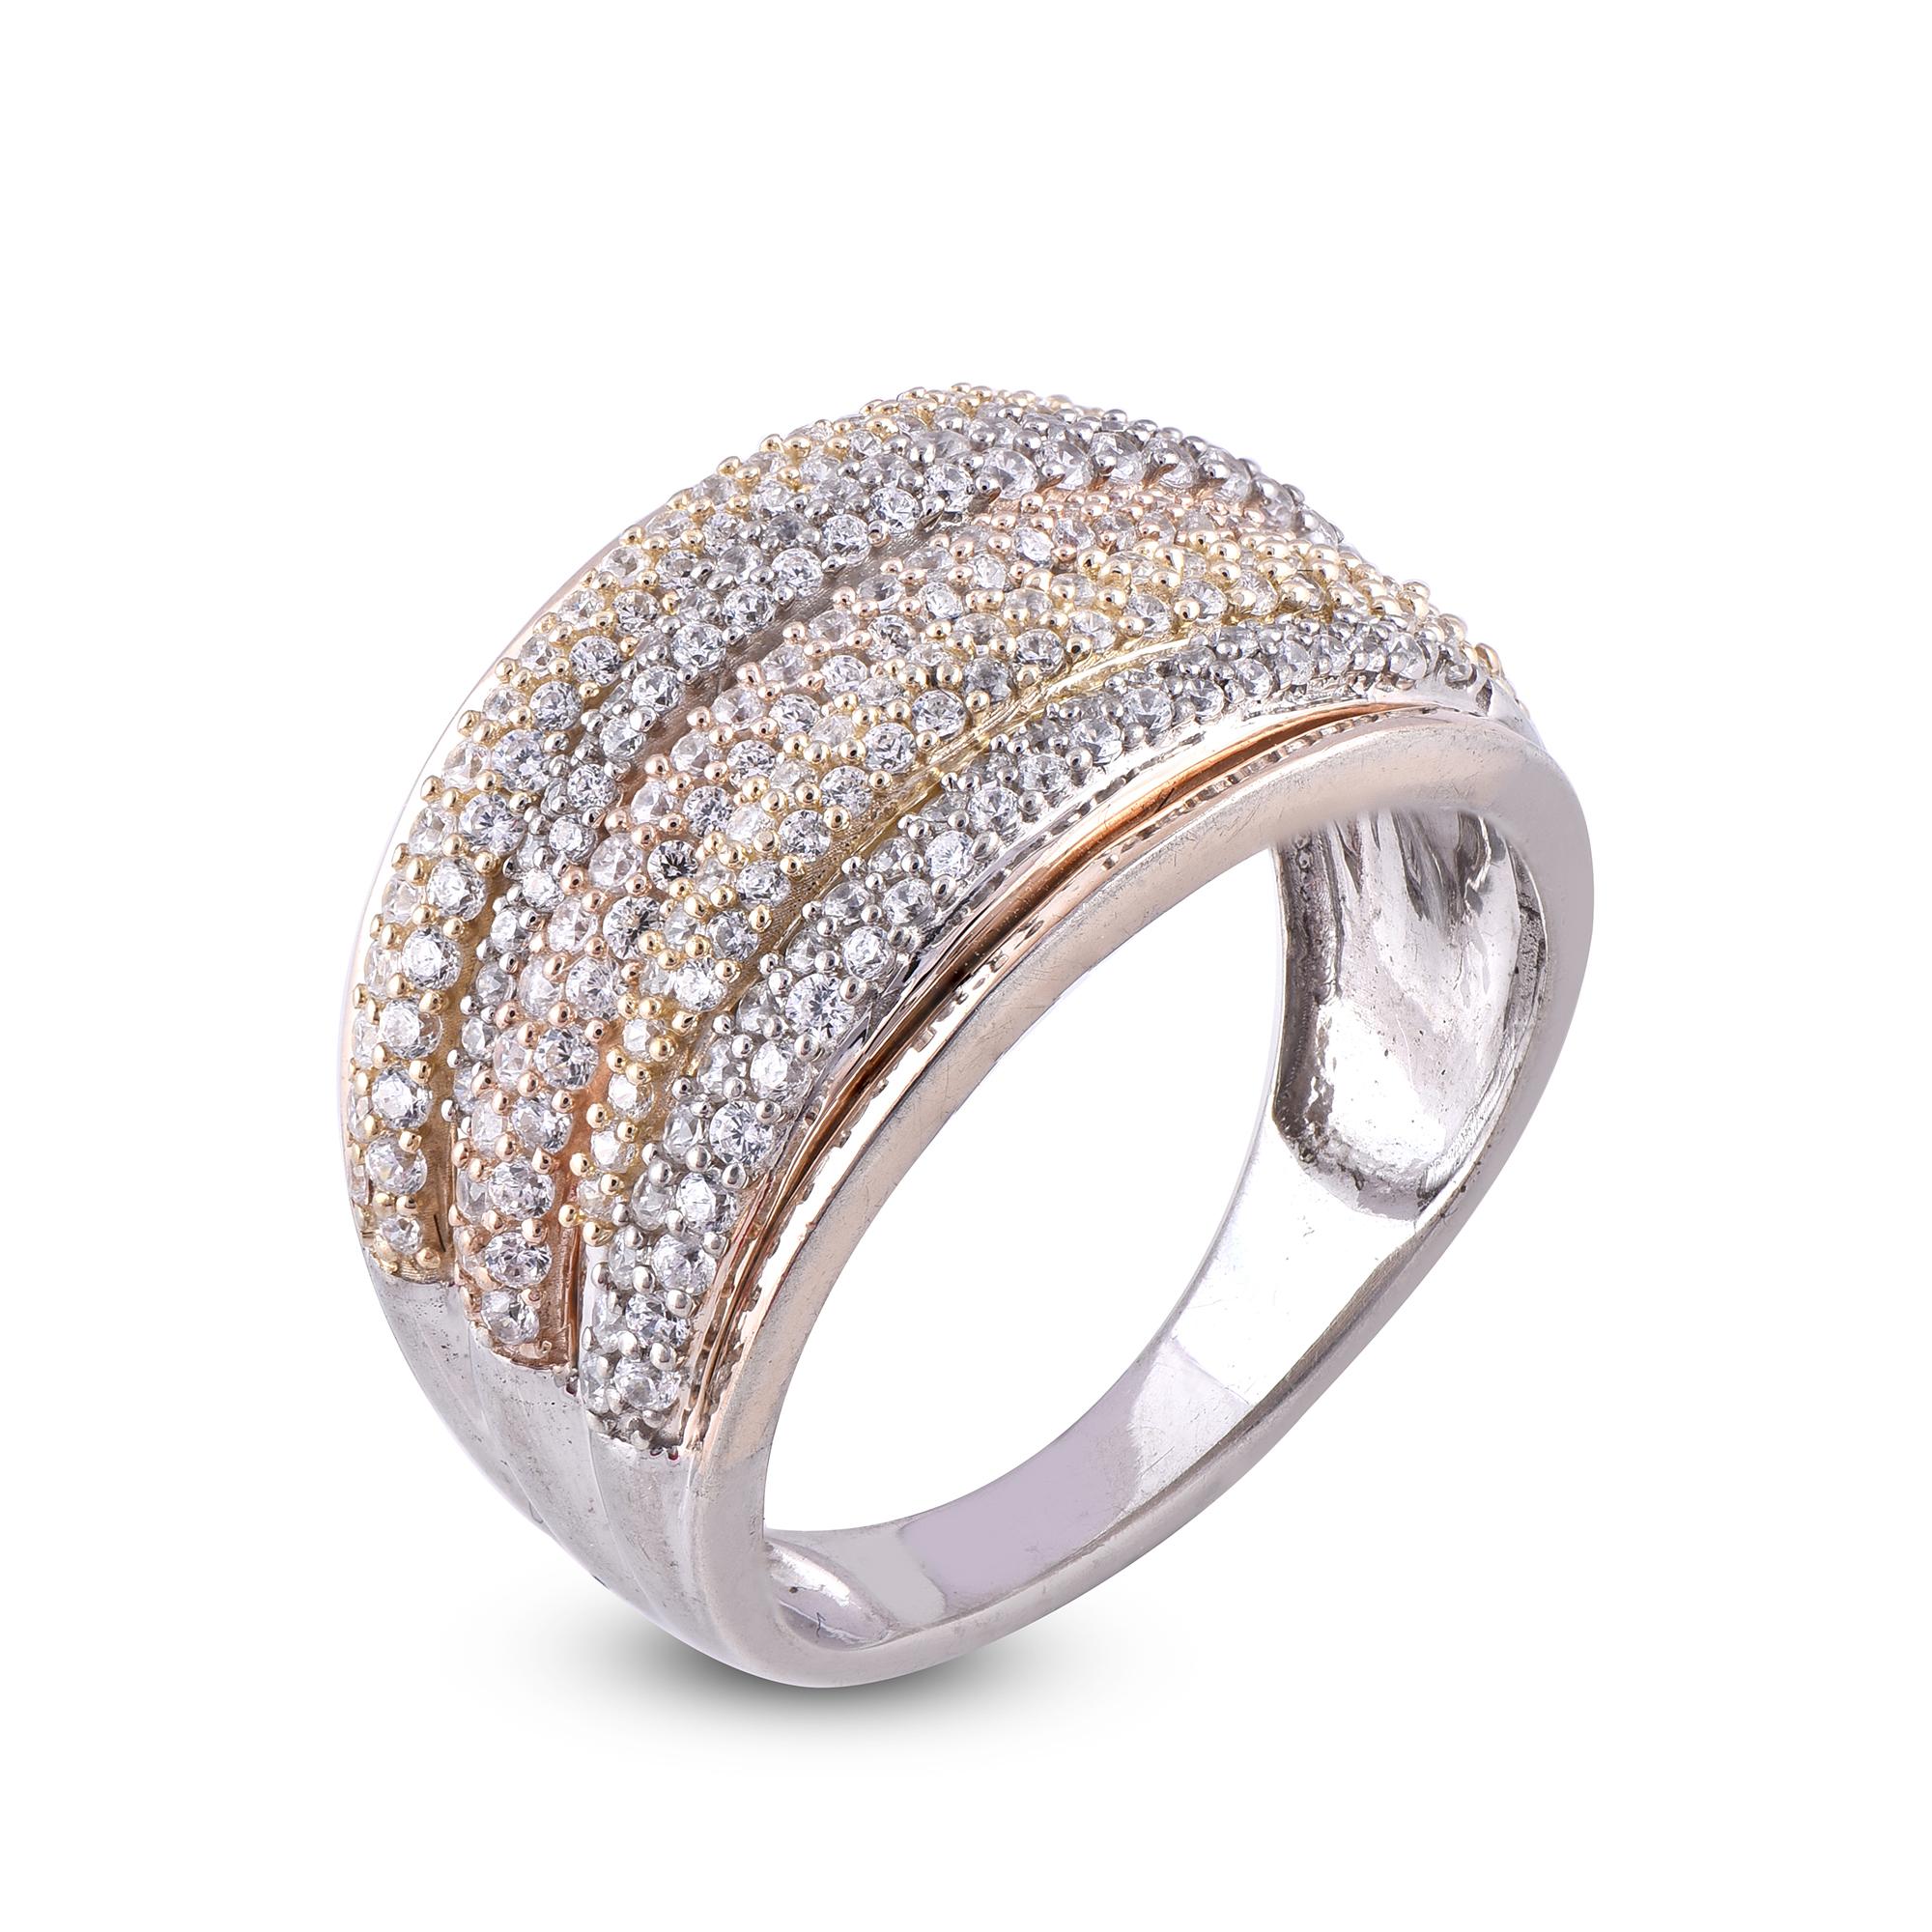 Truly exquisite, she'll admire the effortless look of this graceful split shank diamond ring. The ring is crafted from 14-karat gold in your choice of white, rose, or yellow, and features 210 round diamond set in Pave setting and shine in H-I color